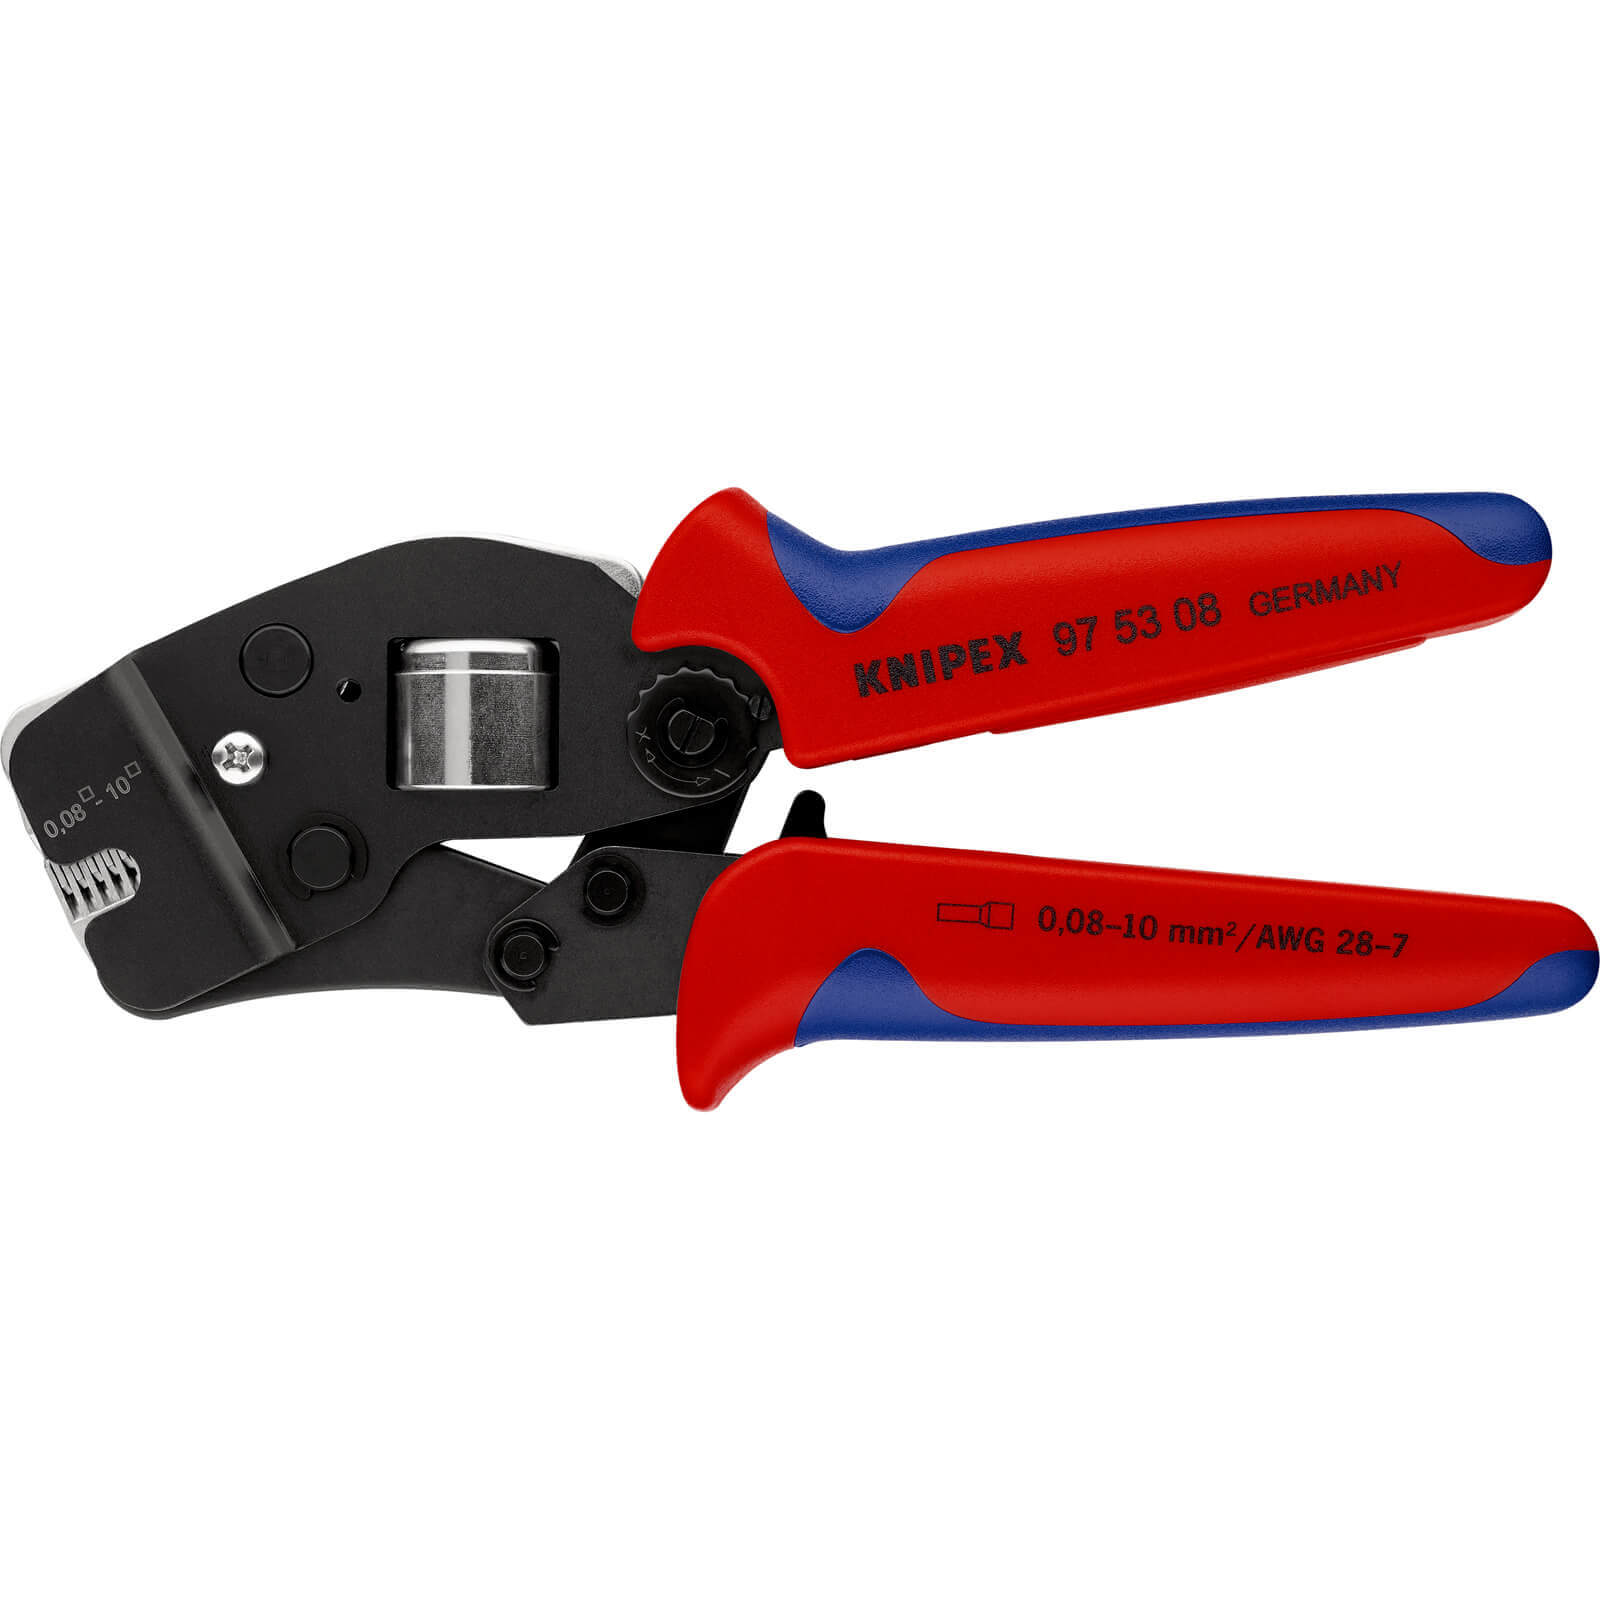 Photo of Knipex 97 53 Front Loading Self Adjusting Crimping Pliers